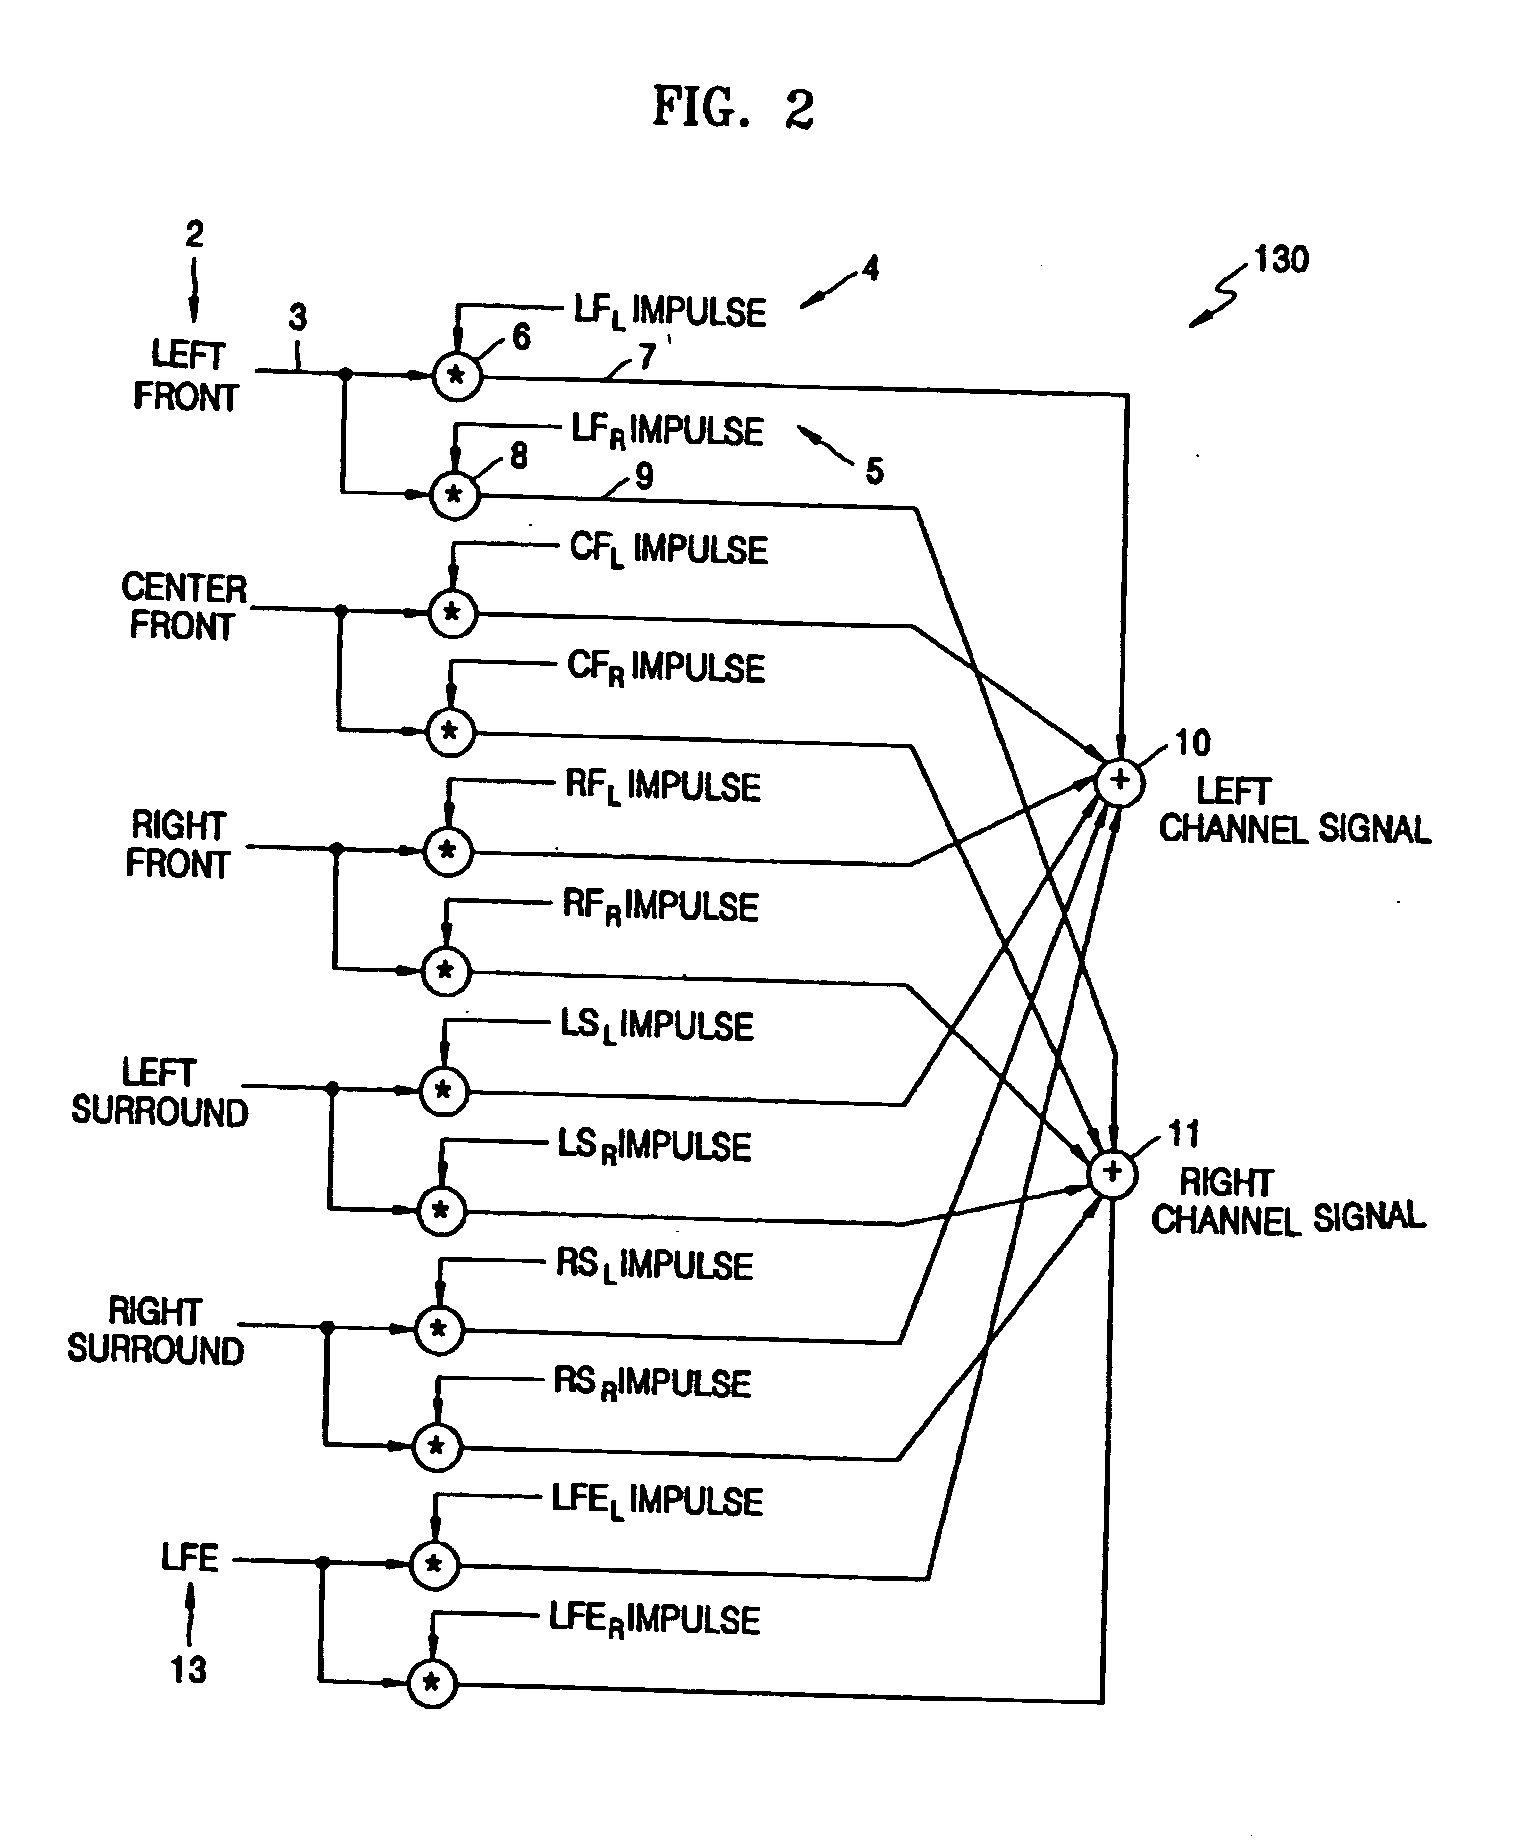 Apparatus and method of reproducing virtual sound